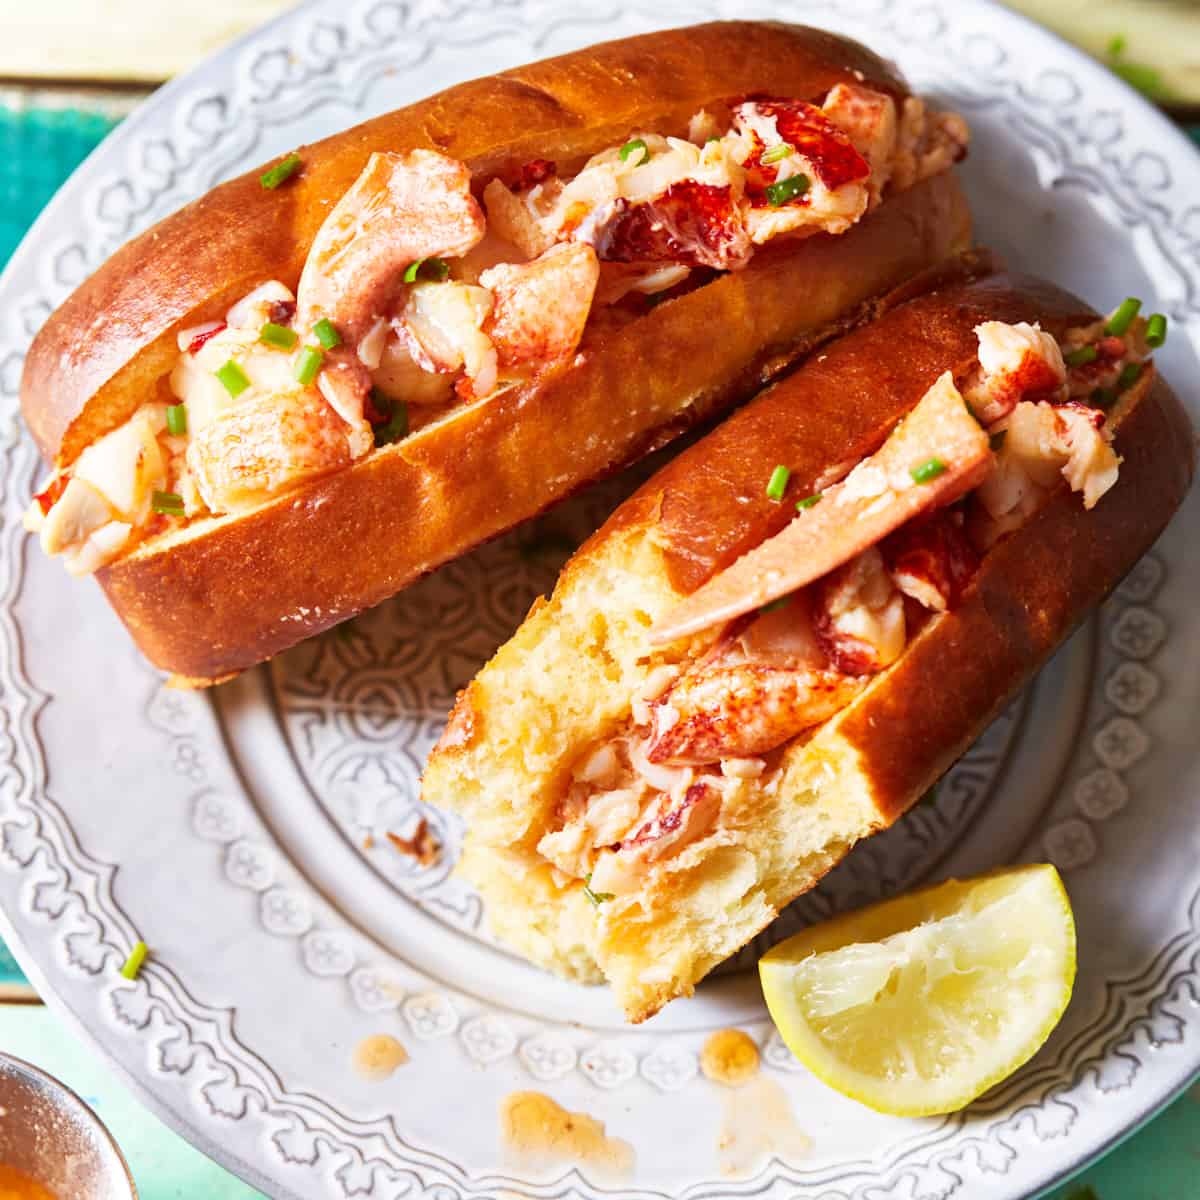 Two lobster sandwiches on a plate with one being half eaten